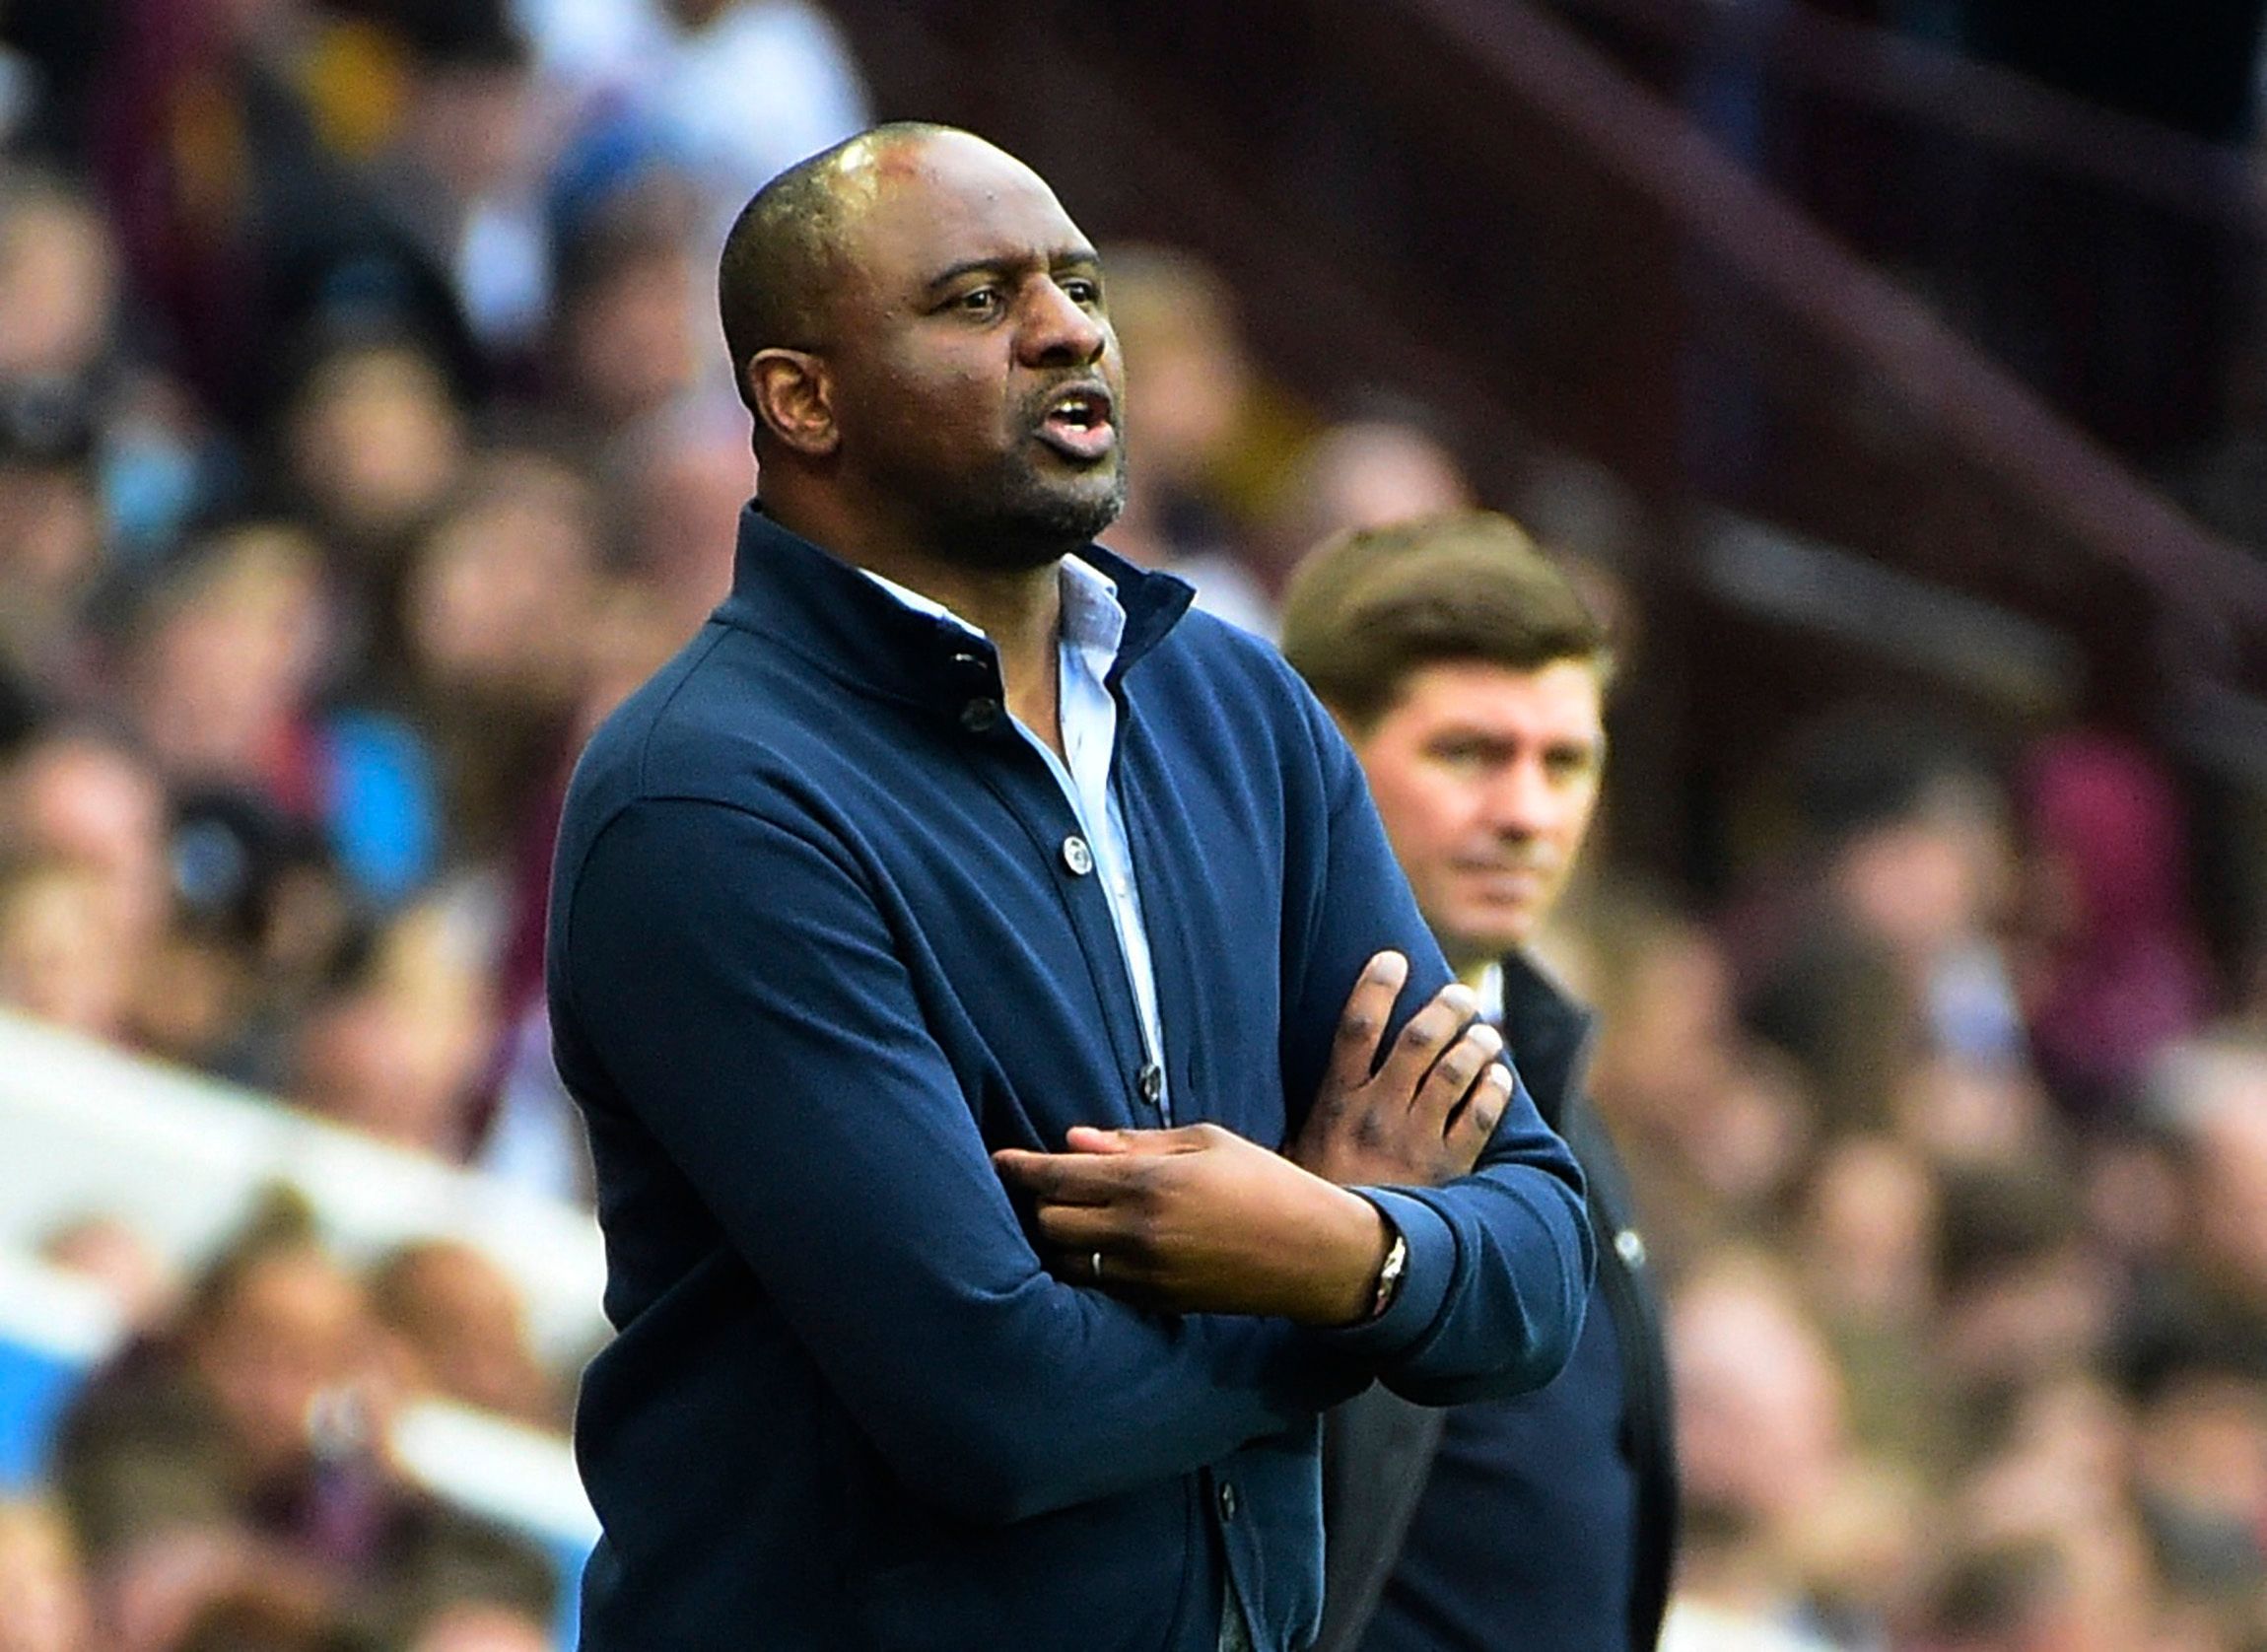 patrick-vieira-crystal-palace-premier-league-jesurun-rak-sakyi-opportunity-michael-olise-injurySoccer Football - Premier League - Aston Villa v Crystal Palace - Villa Park, Birmingham, Britain - May 15, 2022 Crystal Palace manager Patrick Vieira reacts as Aston Villa manager Steven Gerrard looks on REUTERS/Rebecca Naden EDITORIAL USE ONLY. No use with unauthorized audio, video, data, fixture lists, club/league logos or 'live' services. Online in-match use limited to 75 images, no video emulation